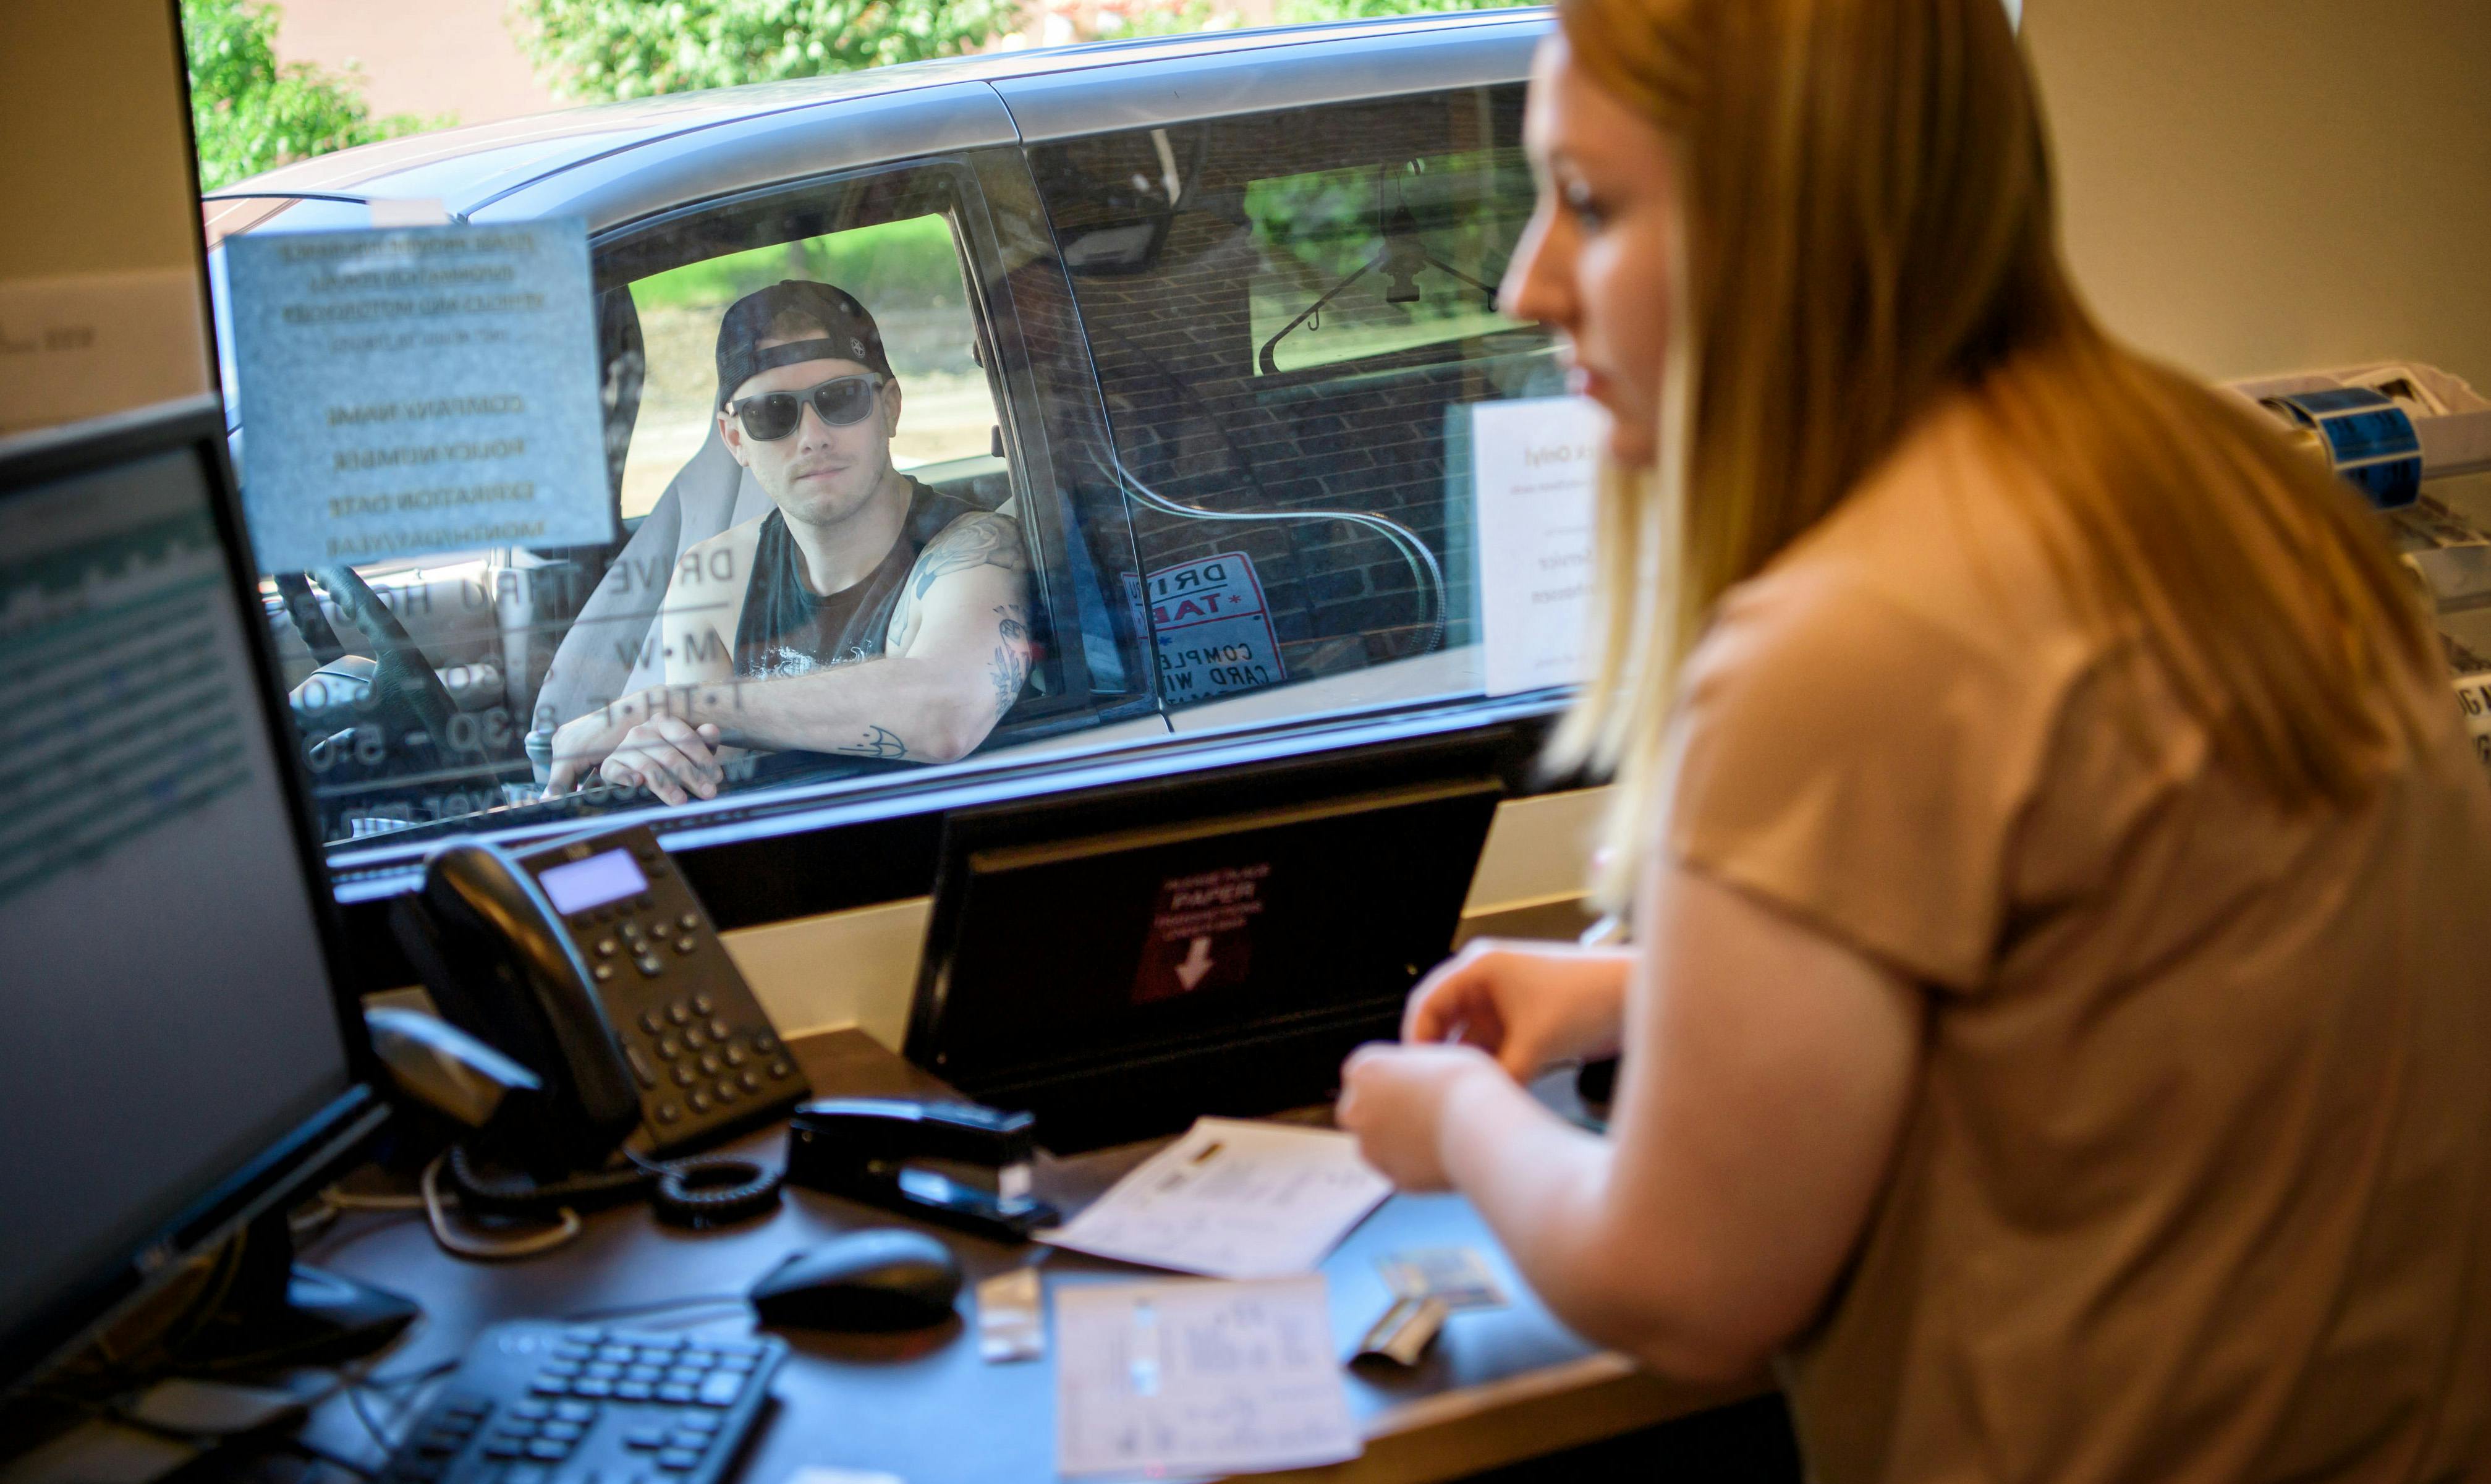 Miranda Sylvander helped Jacob Leverenz get a new set of vehicle license plates and tabs at the Carver County Service Center in Chanhassen in 2016.